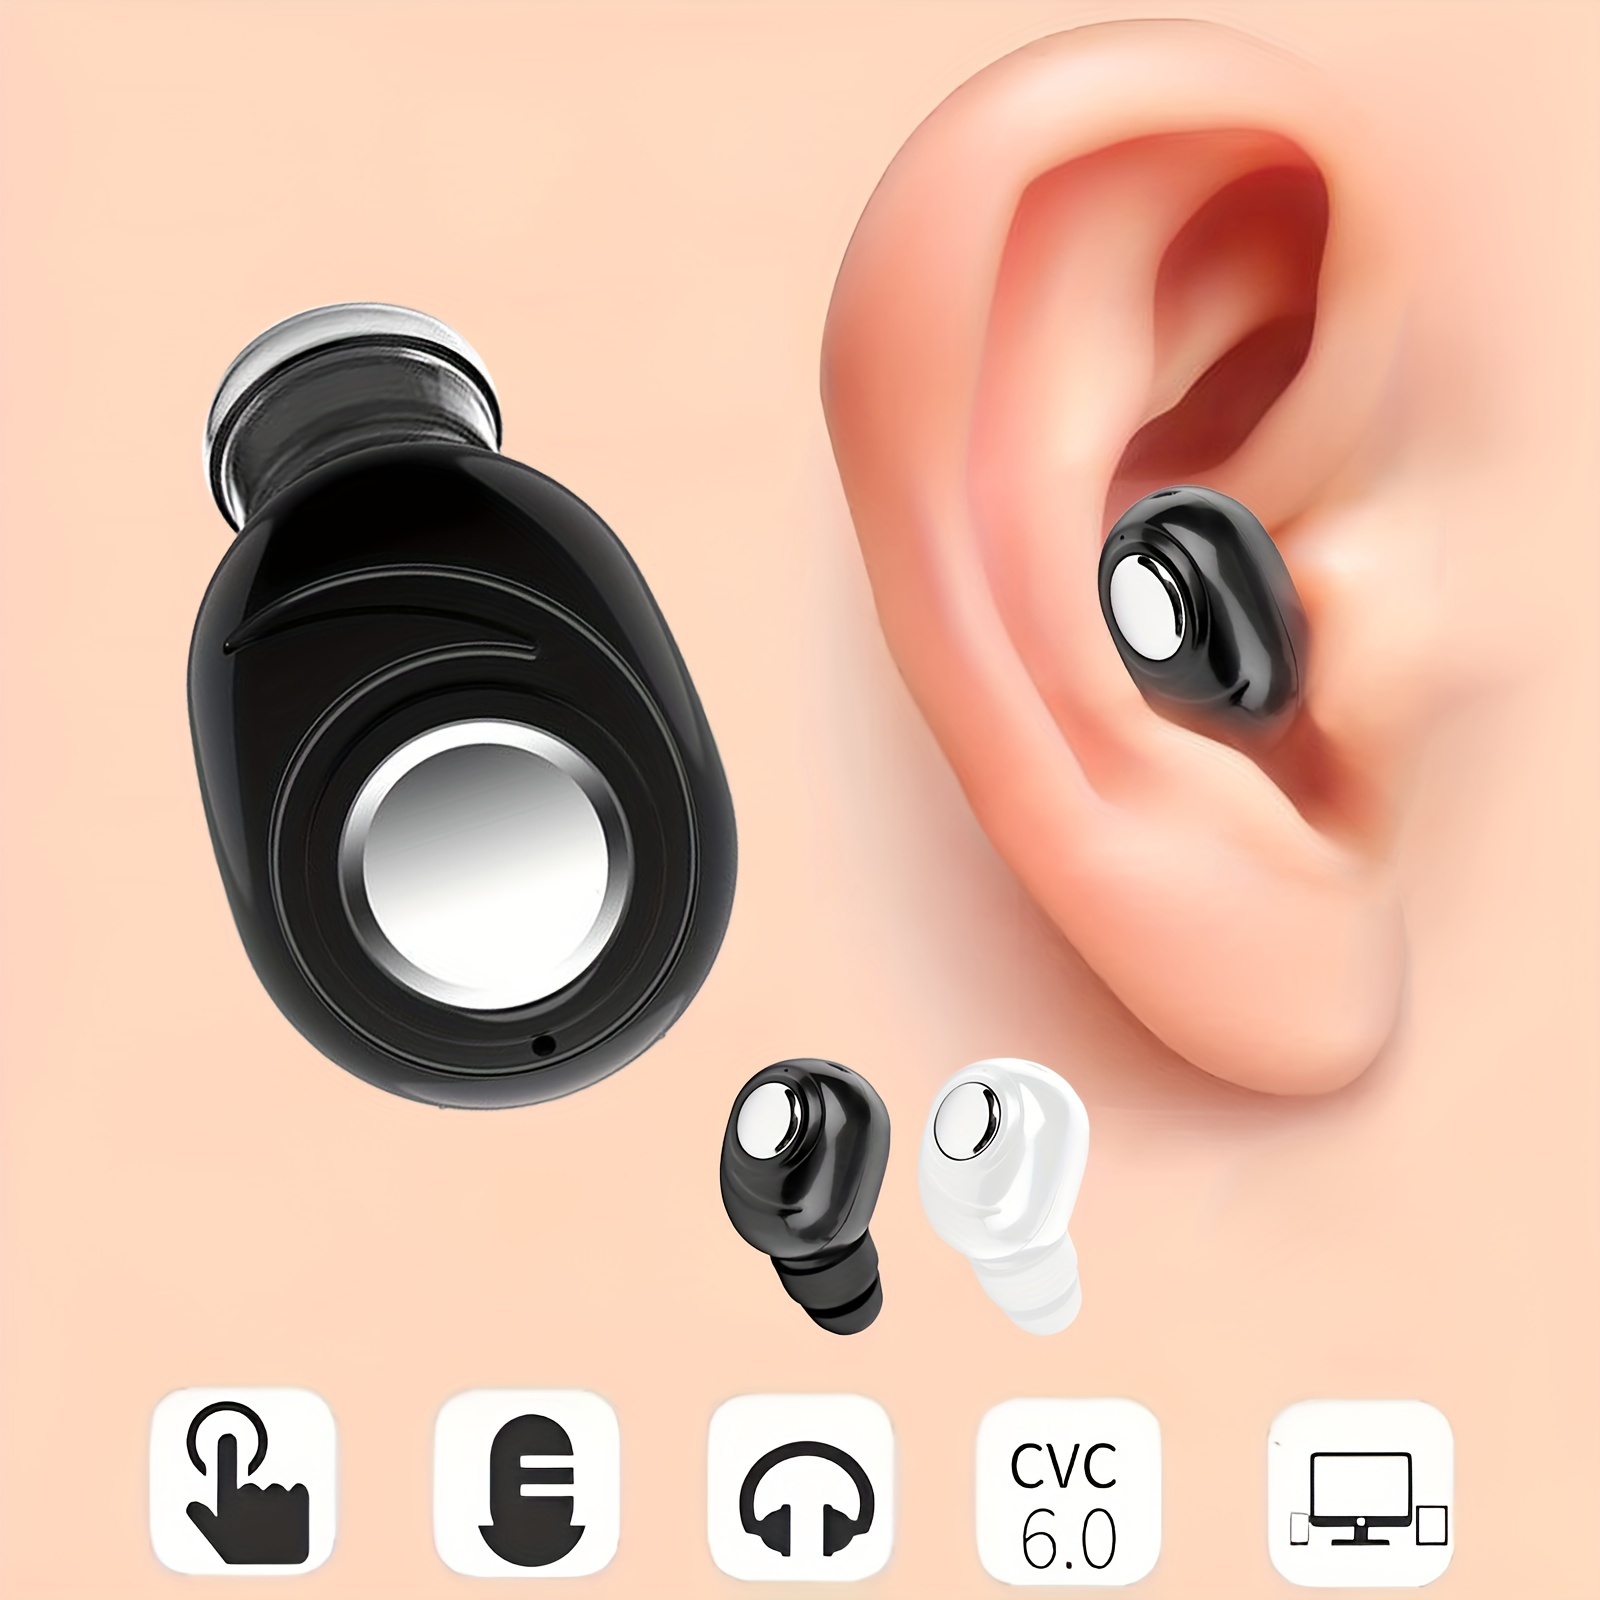 

Wireless Earbud Mini Wireless Earbud In Ear Headphone With 4-5 Hours Playtime Headset With Mic Forandsmartphones